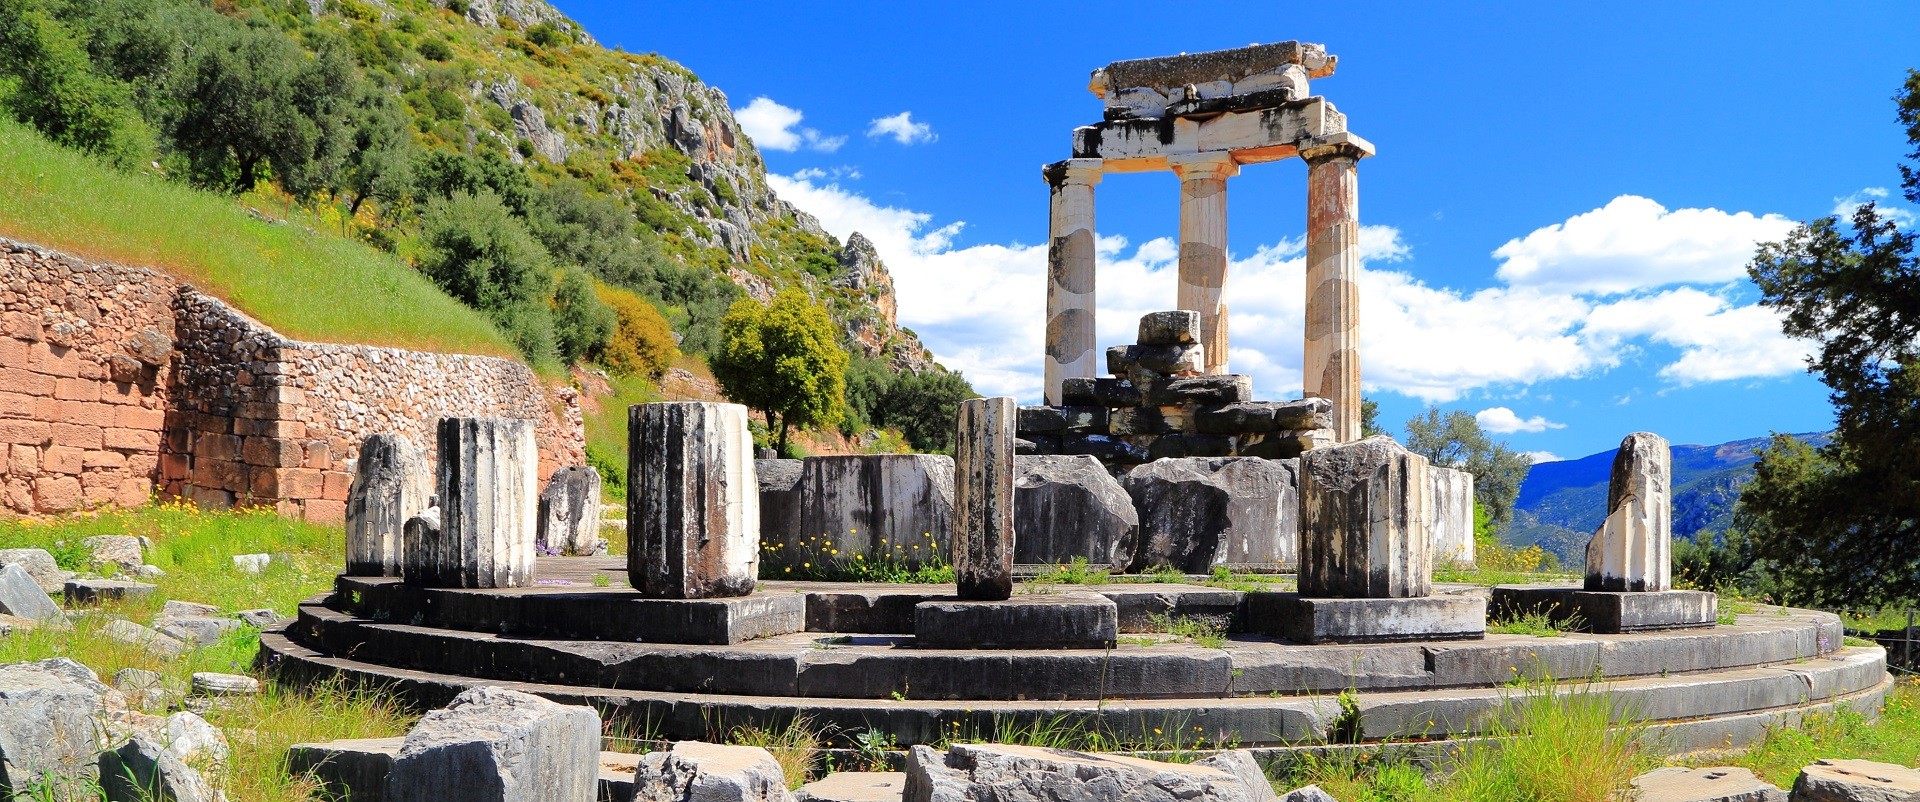 Day Tour to Delphi, the Navel of the World